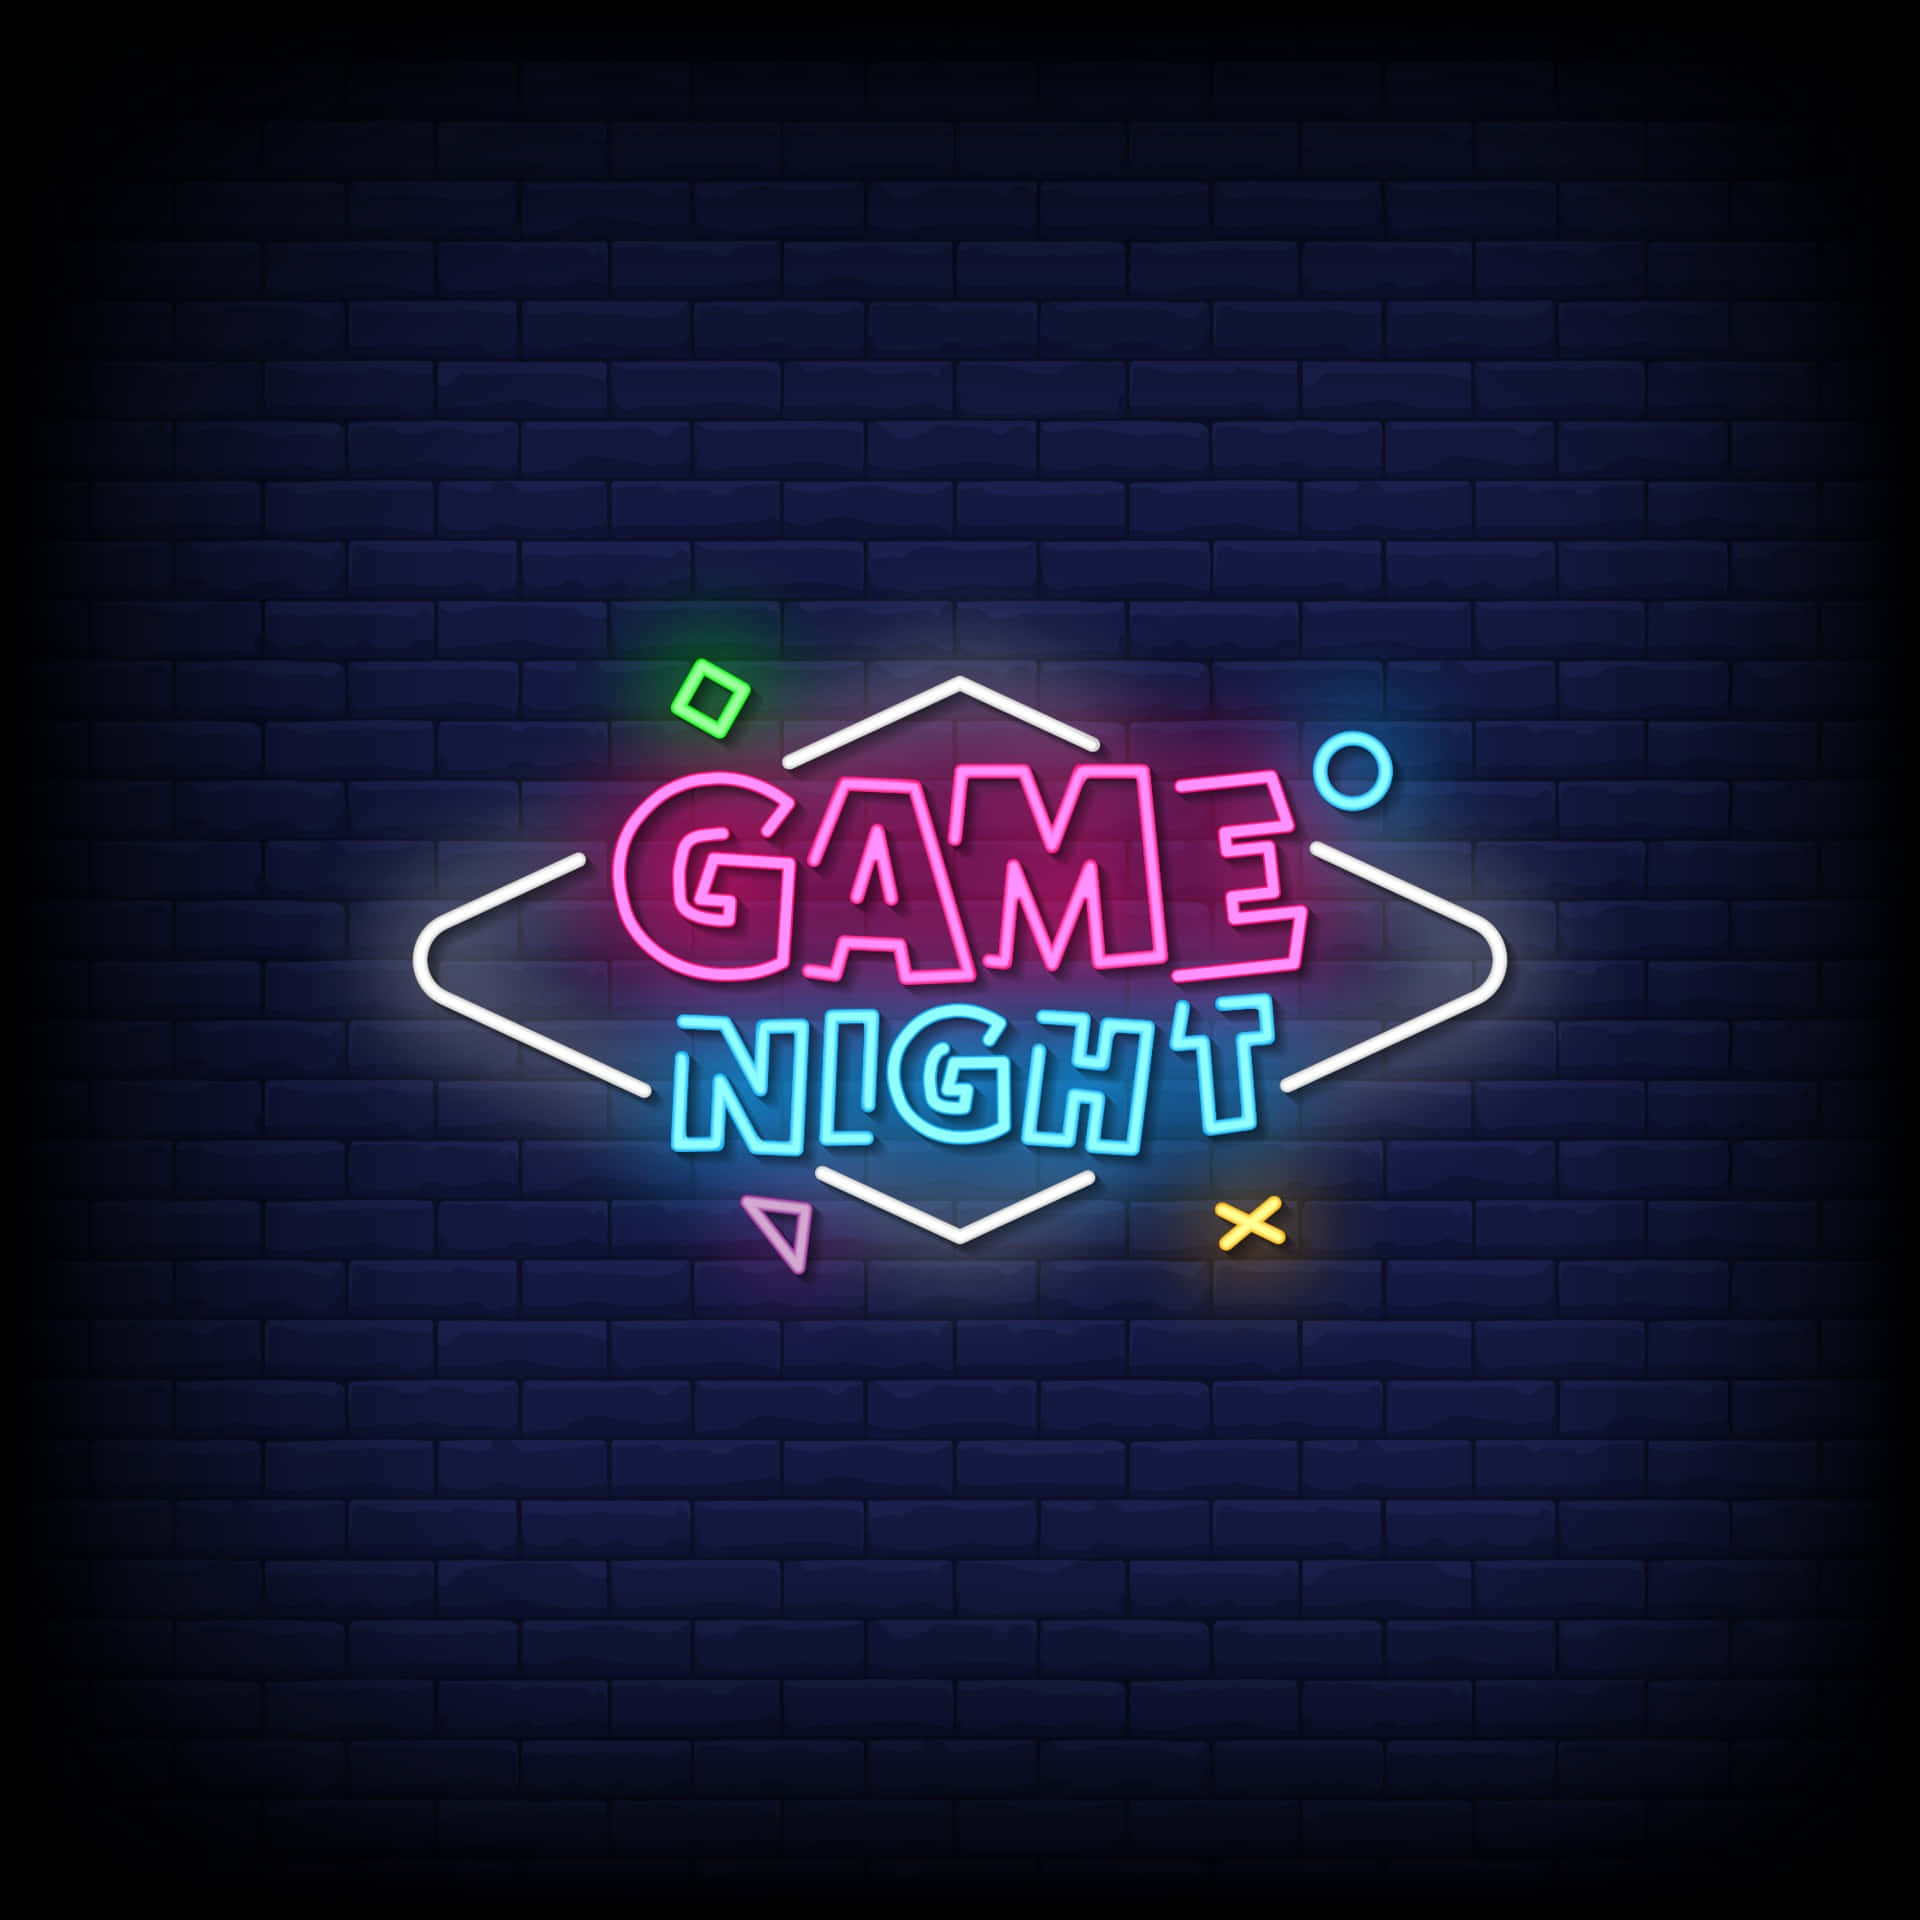 Neon Game Night Sign On A Brick Wall